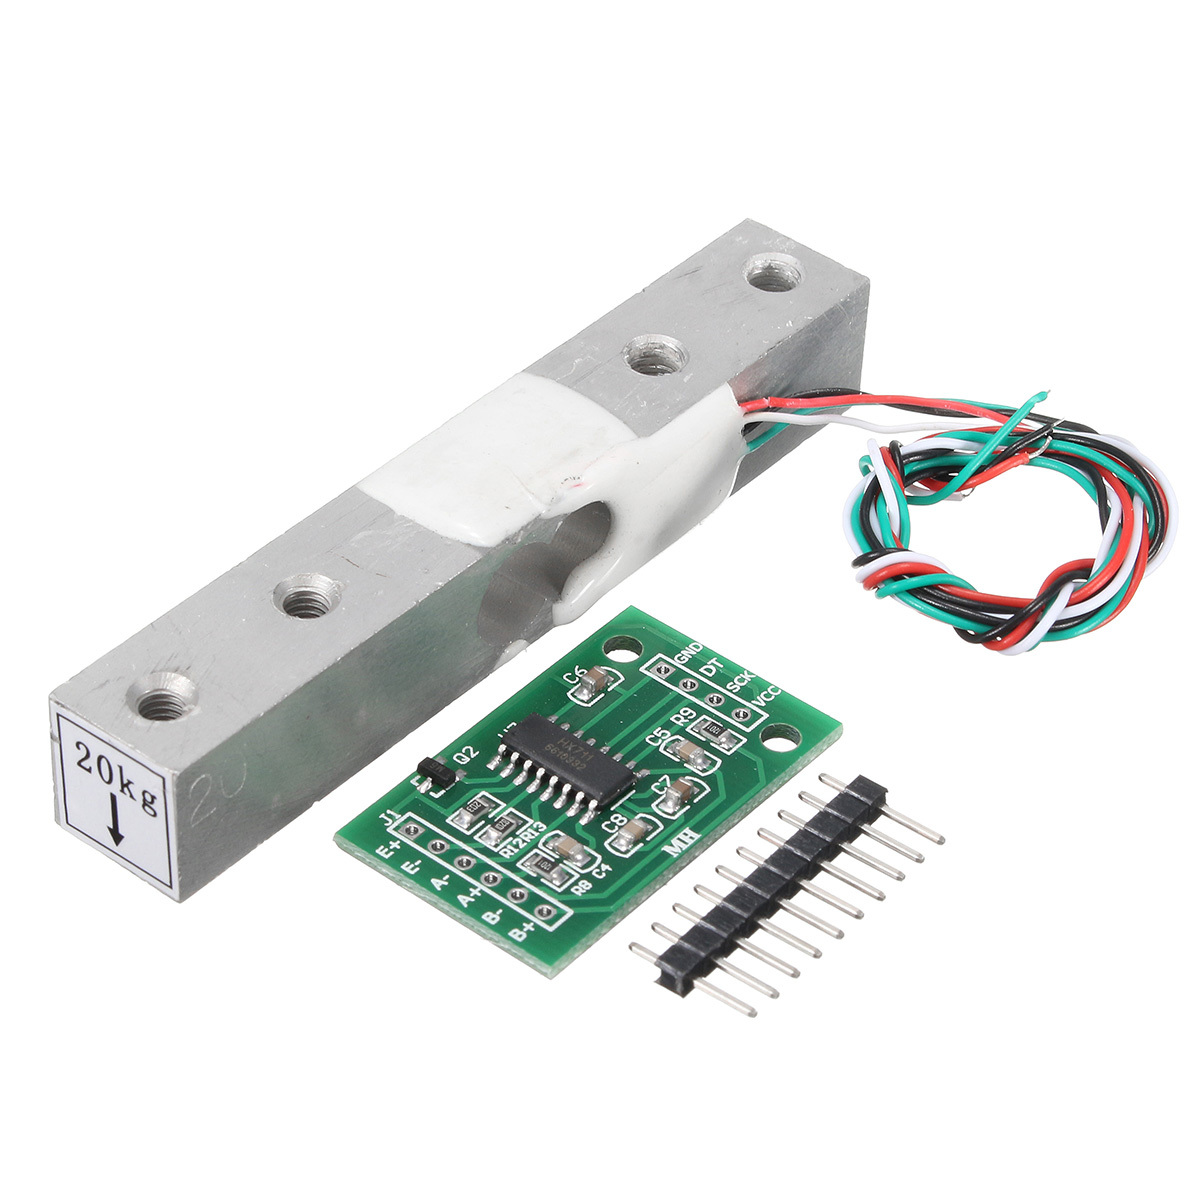 HX711 Module + 20kg Aluminum Alloy Scale Weighing Sensor Load Cell Kit 2